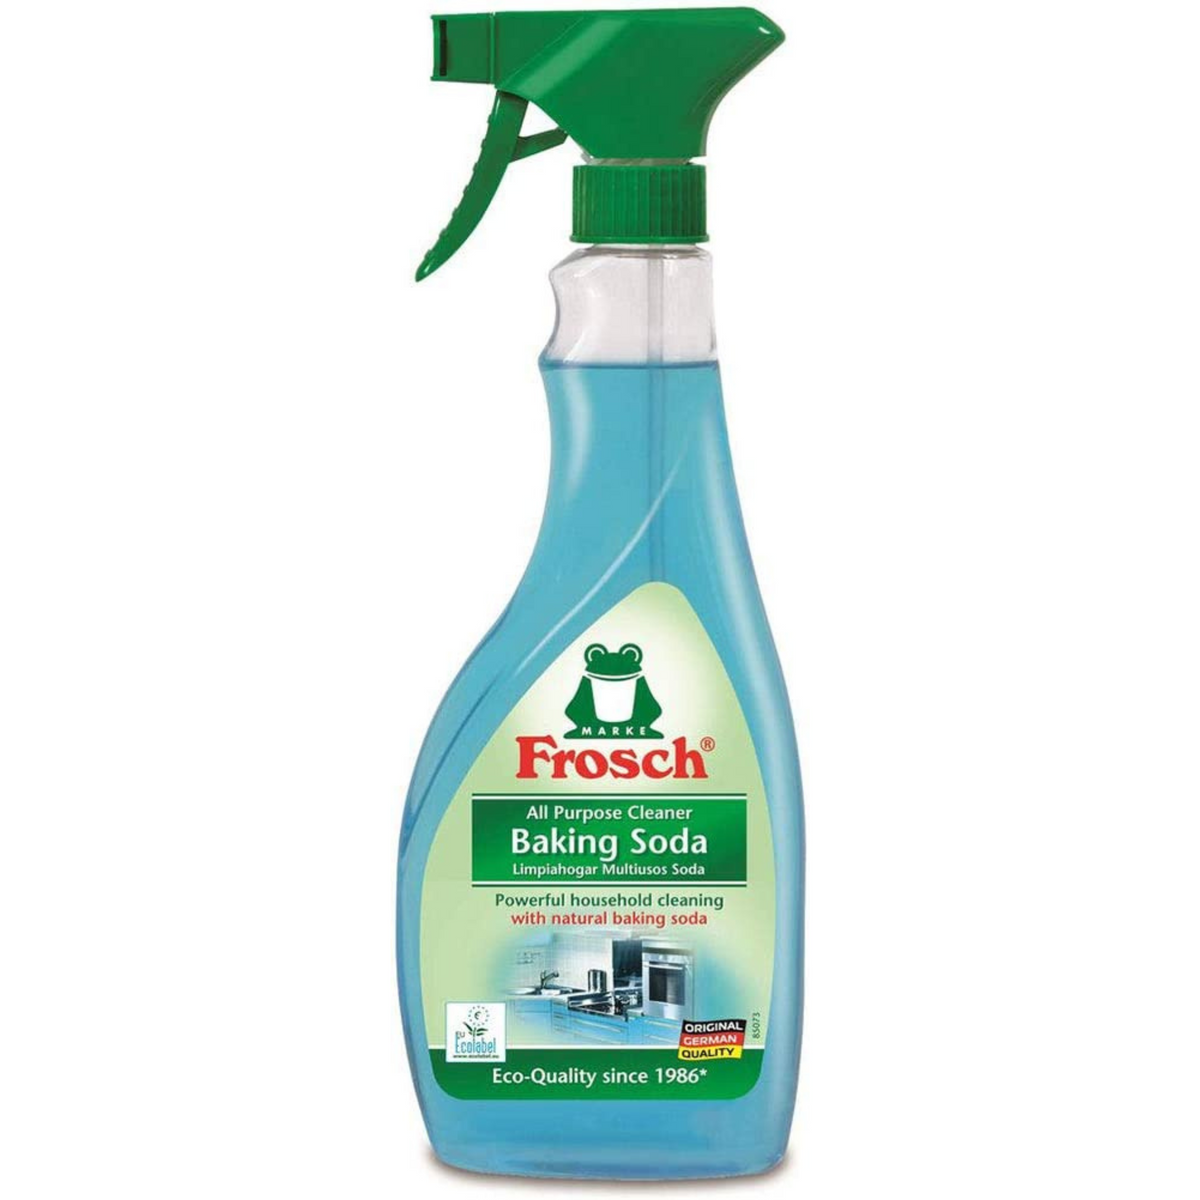 Primary Image of Frosch Baking Soda All-Purpose Cleaning Spray (500 ml)